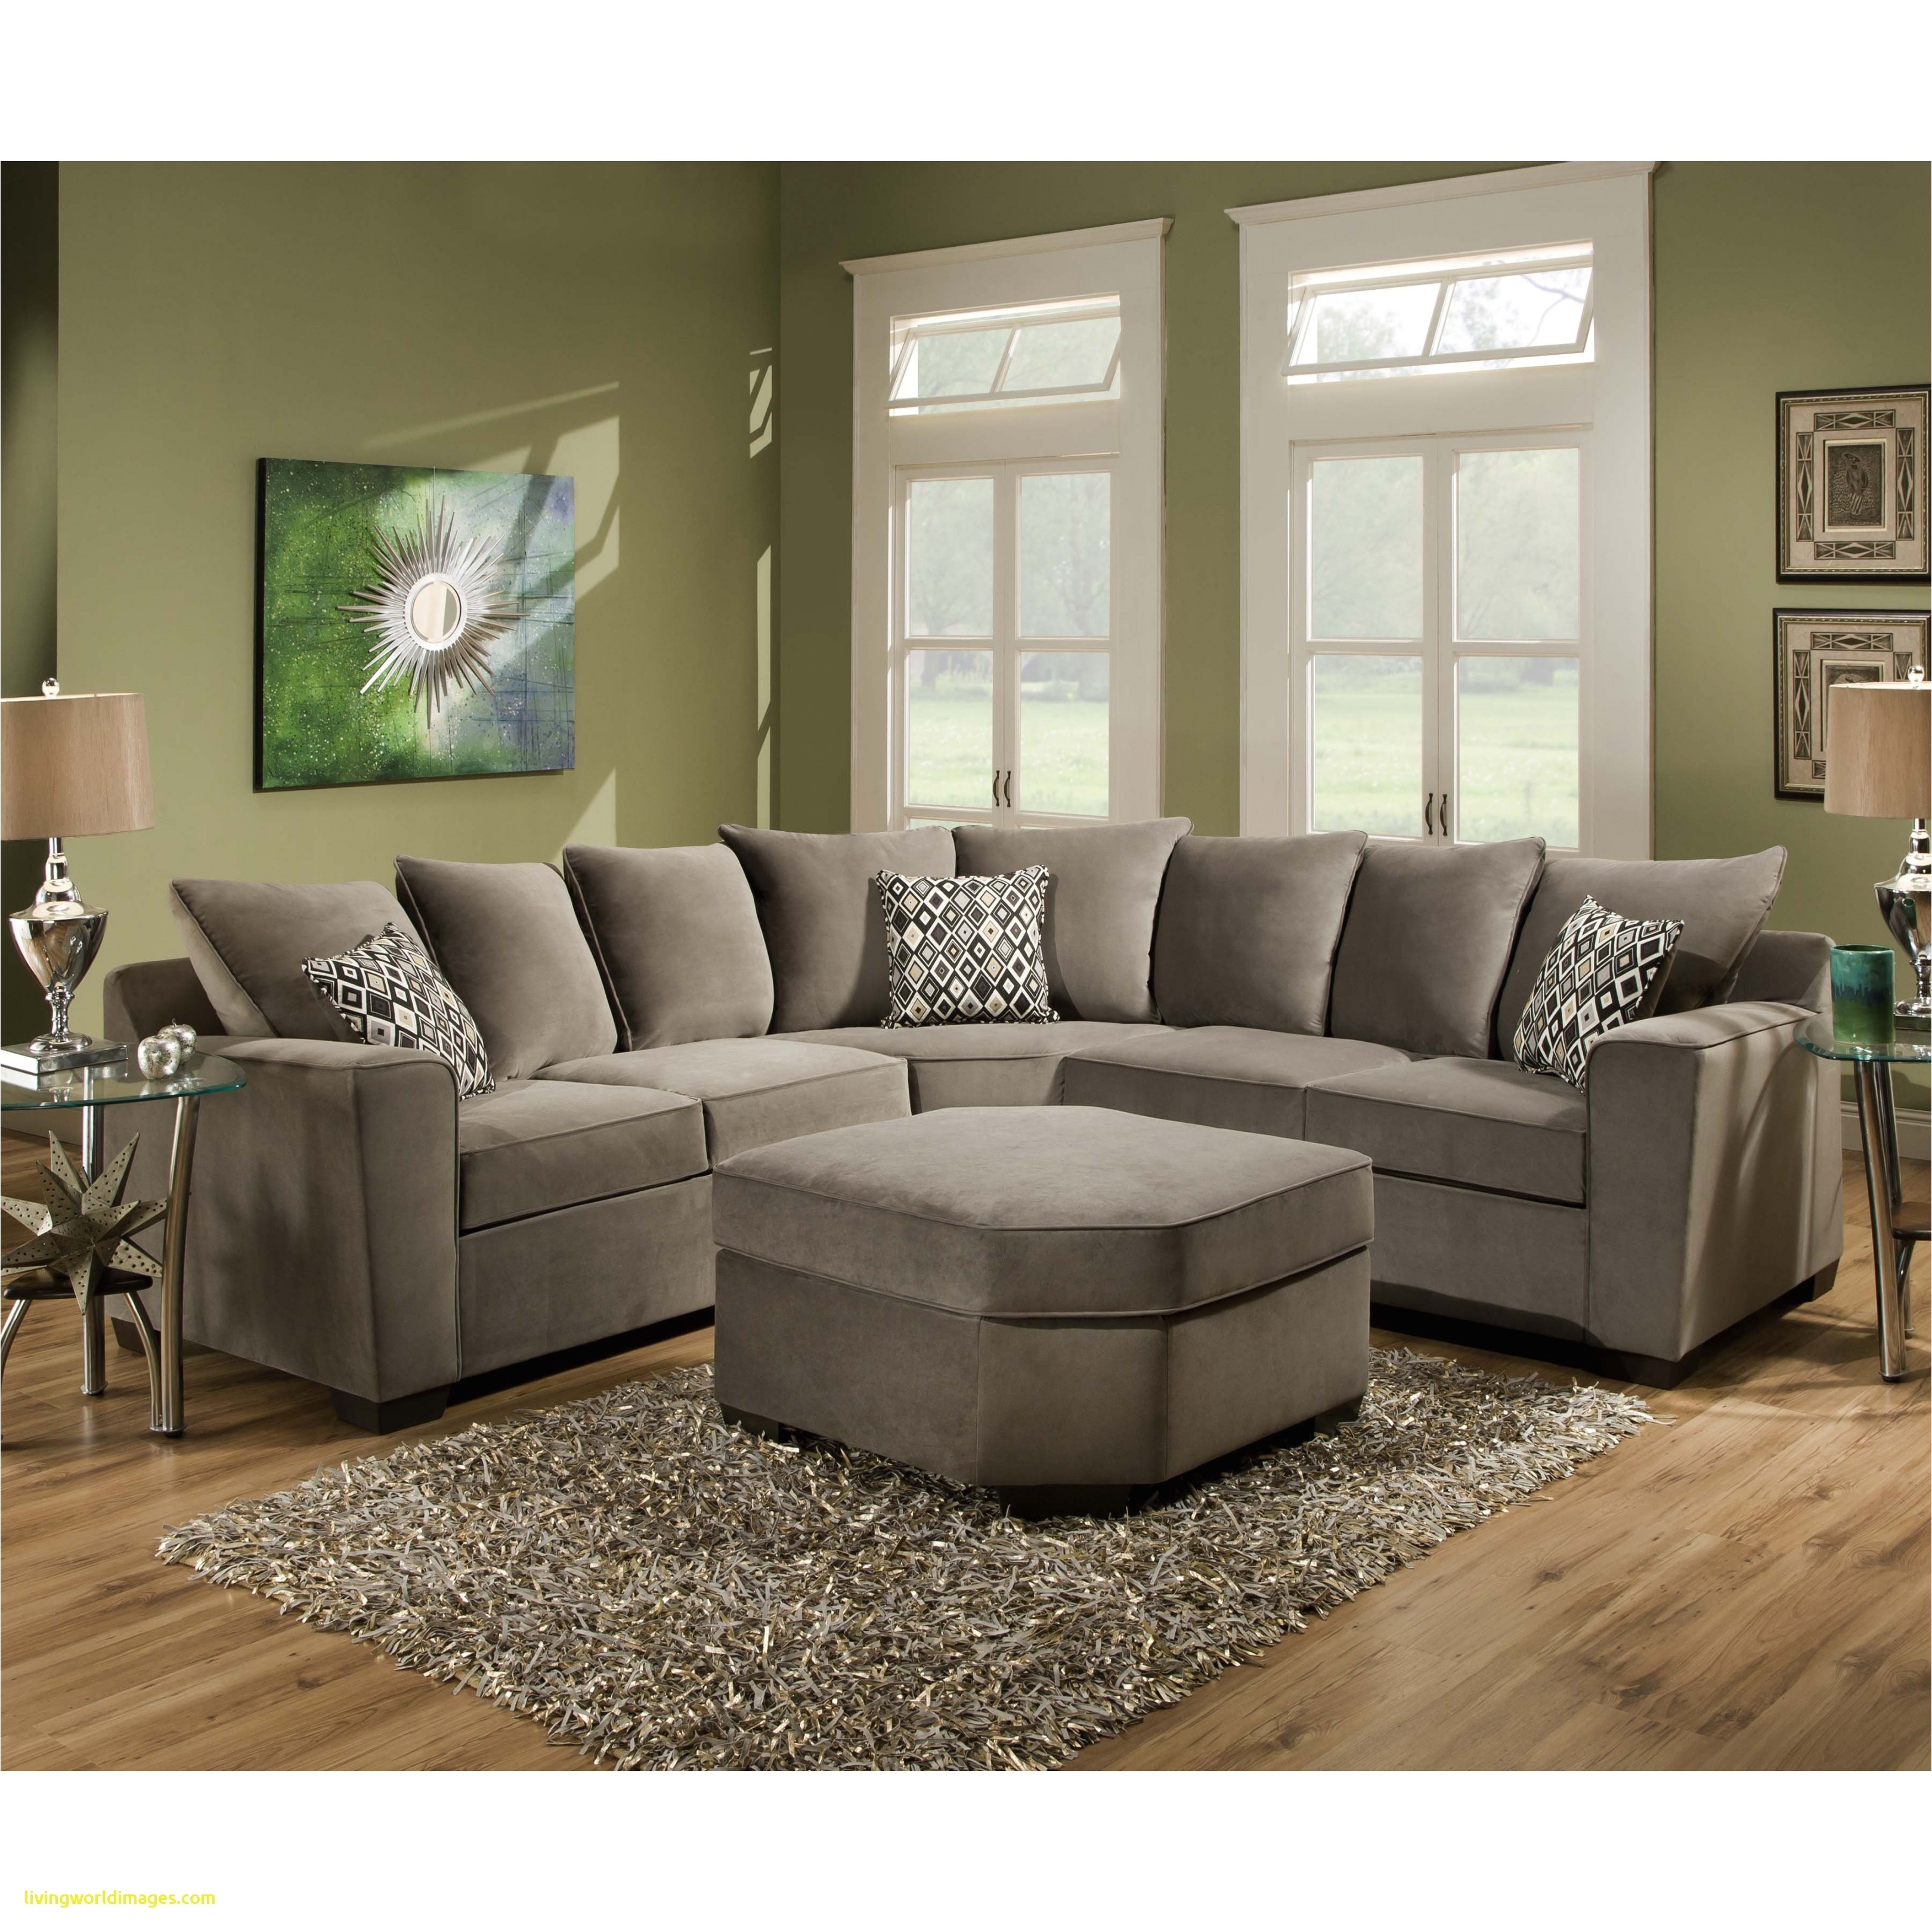 Big Lots Living Room Furniture Room Pictures All About Home